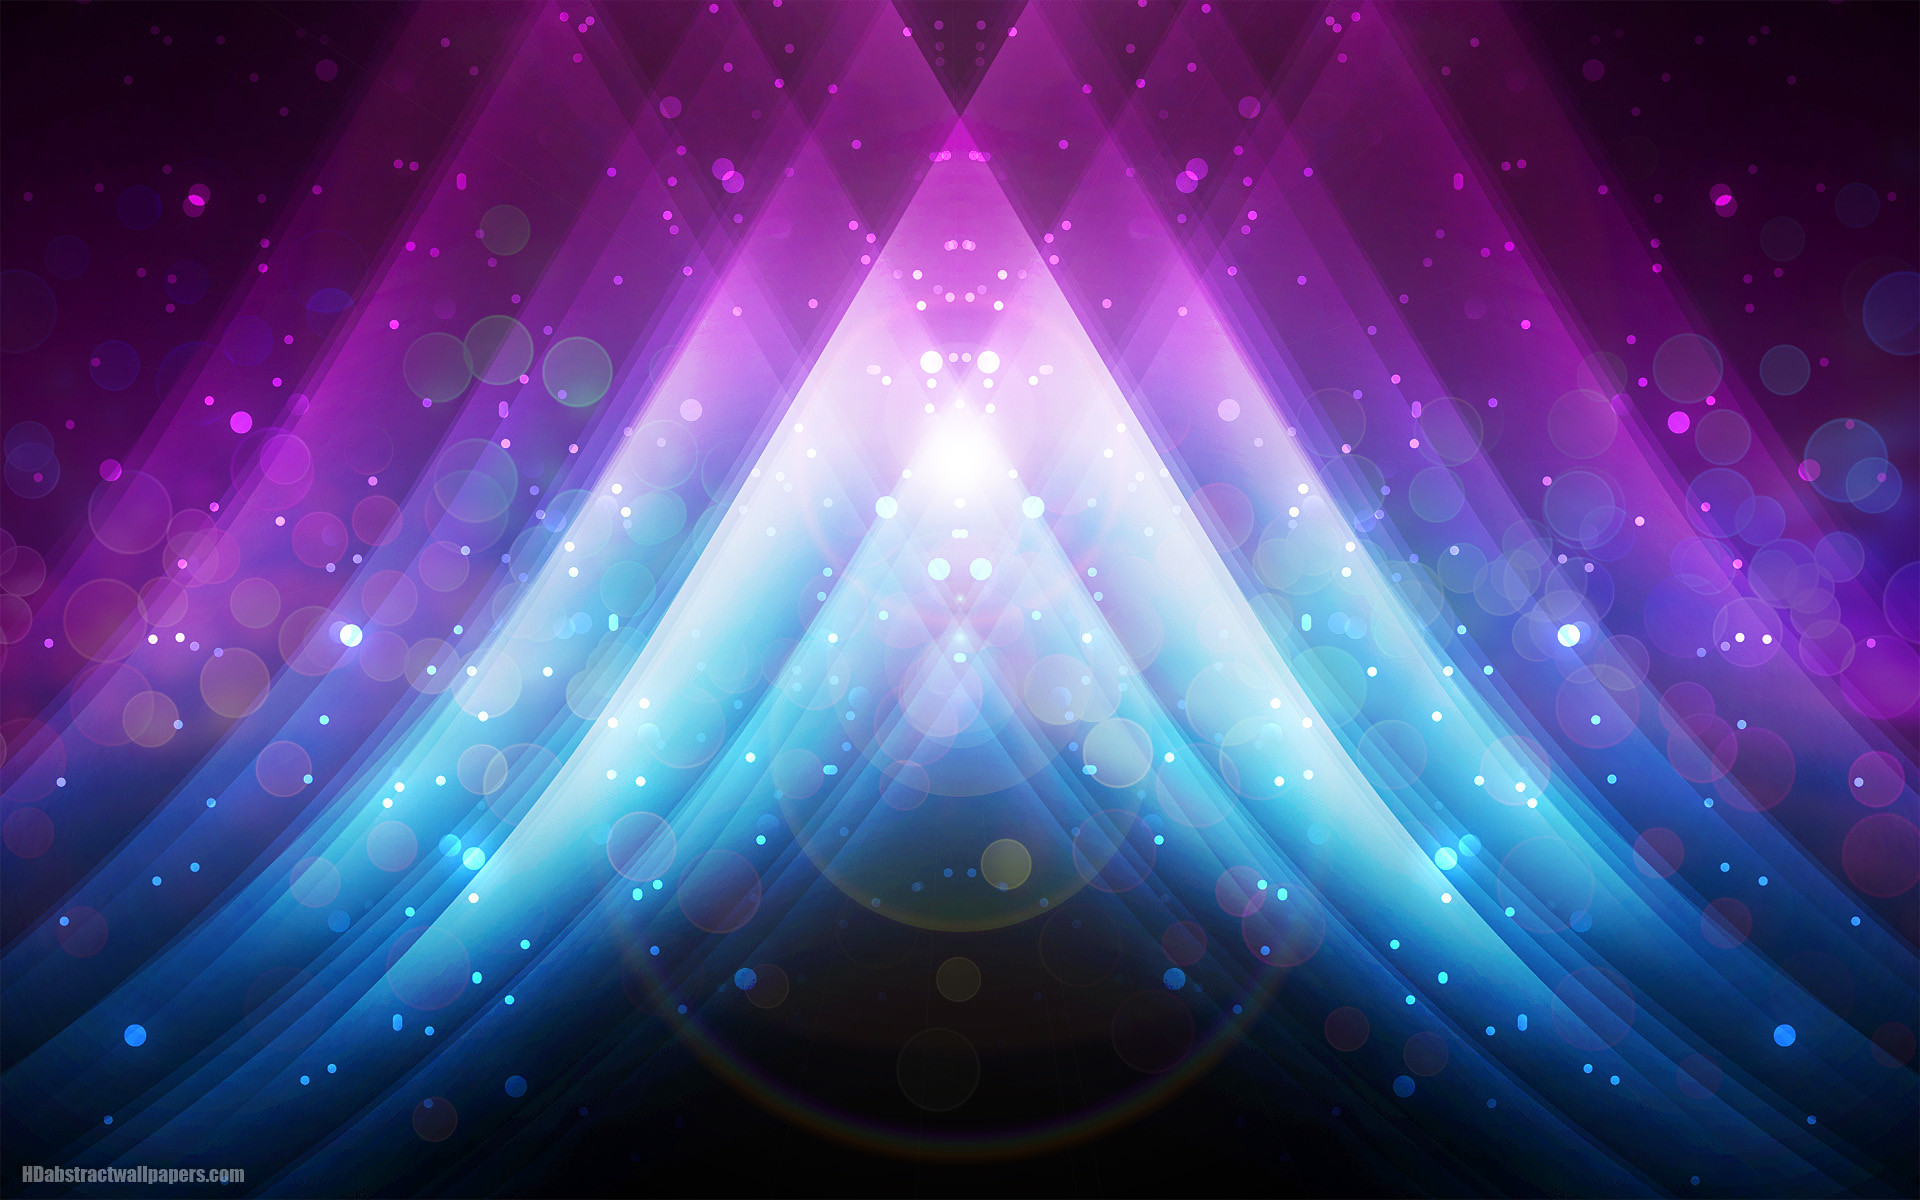 Abstract wallpaper with beautiful colors, lights, lines and circles.  Beautiful abstract blue, purple and pink colors.